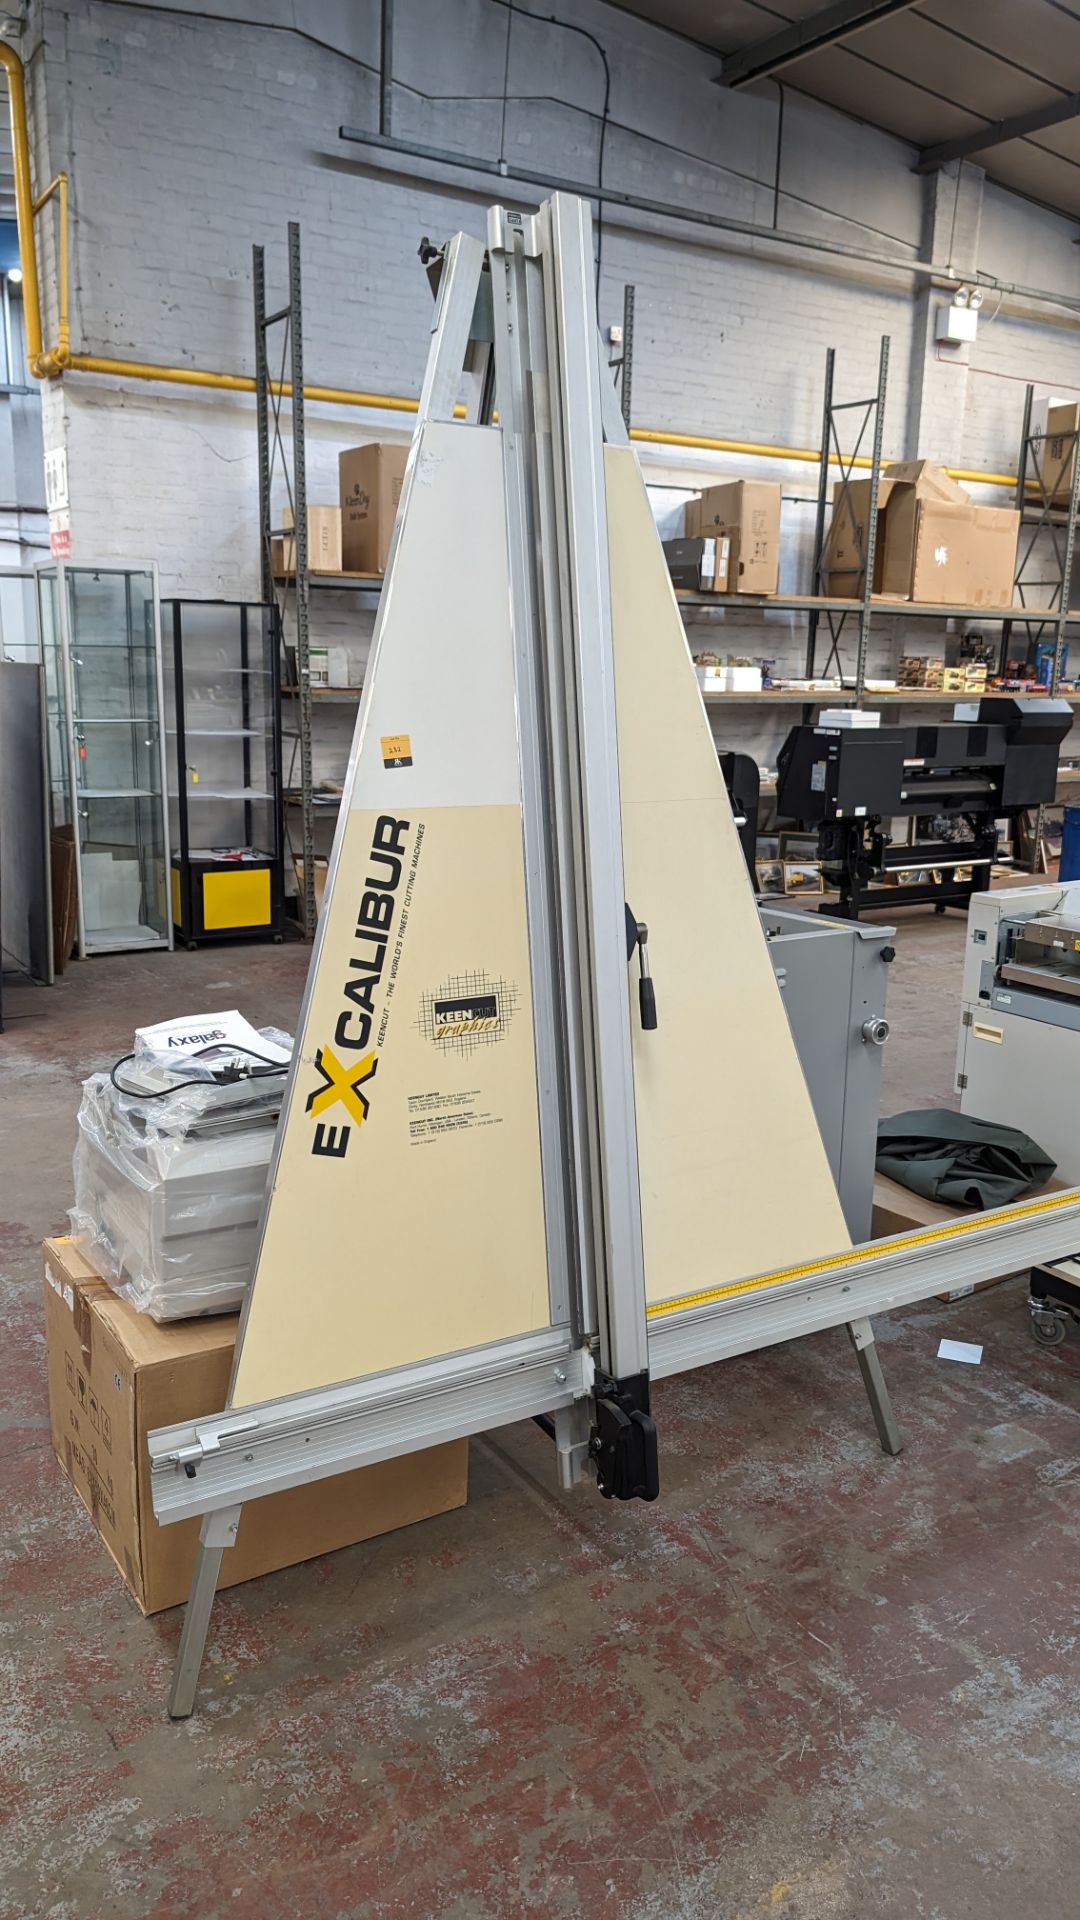 Keencut Graphics Excalibur A frame cutter. Height approximately 2330mm, max width including measuri - Bild 2 aus 13